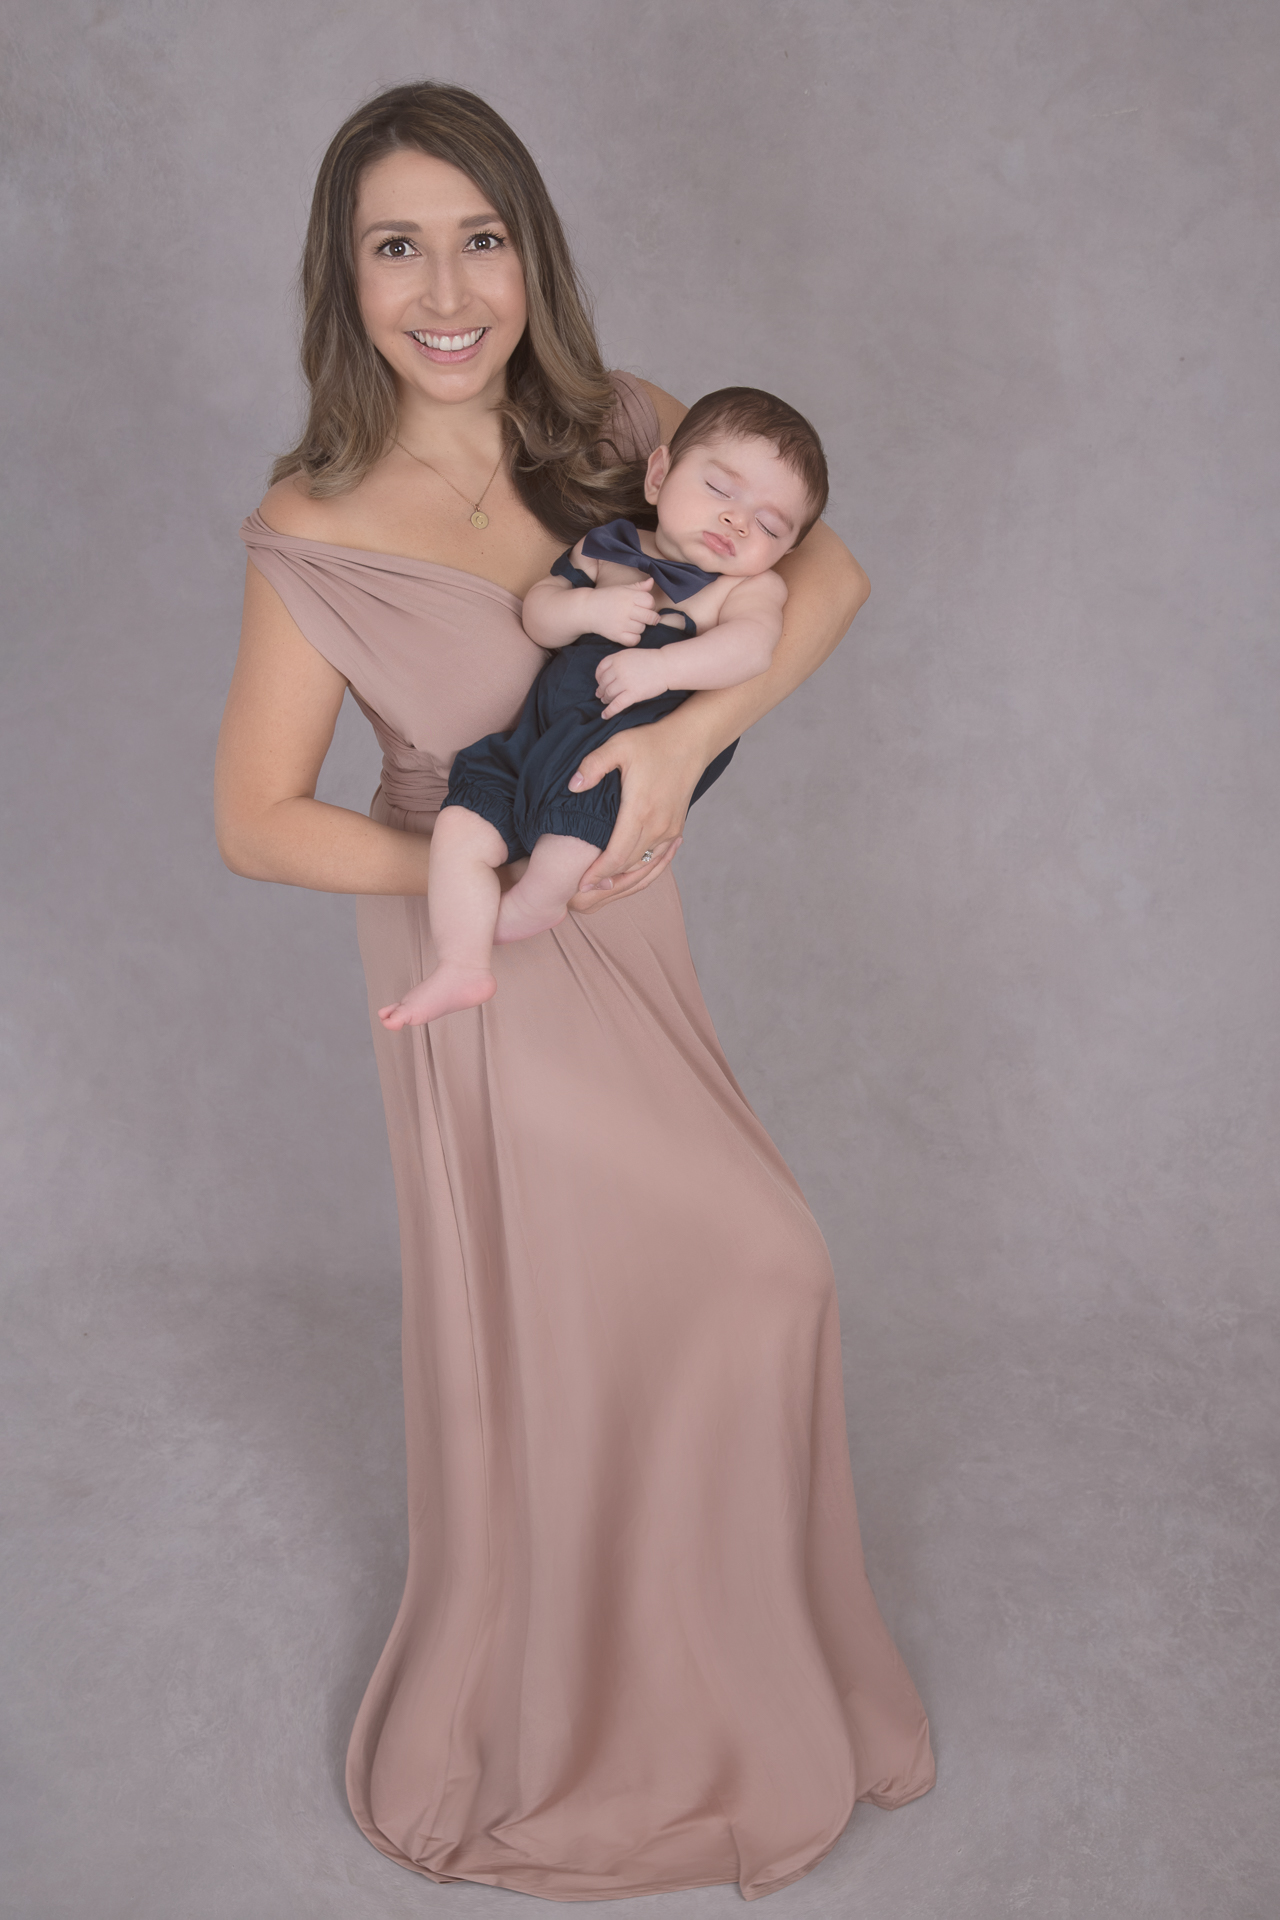 Mom holds her baby boy while wearing brown dress outfit. Baby wears blue outfit.